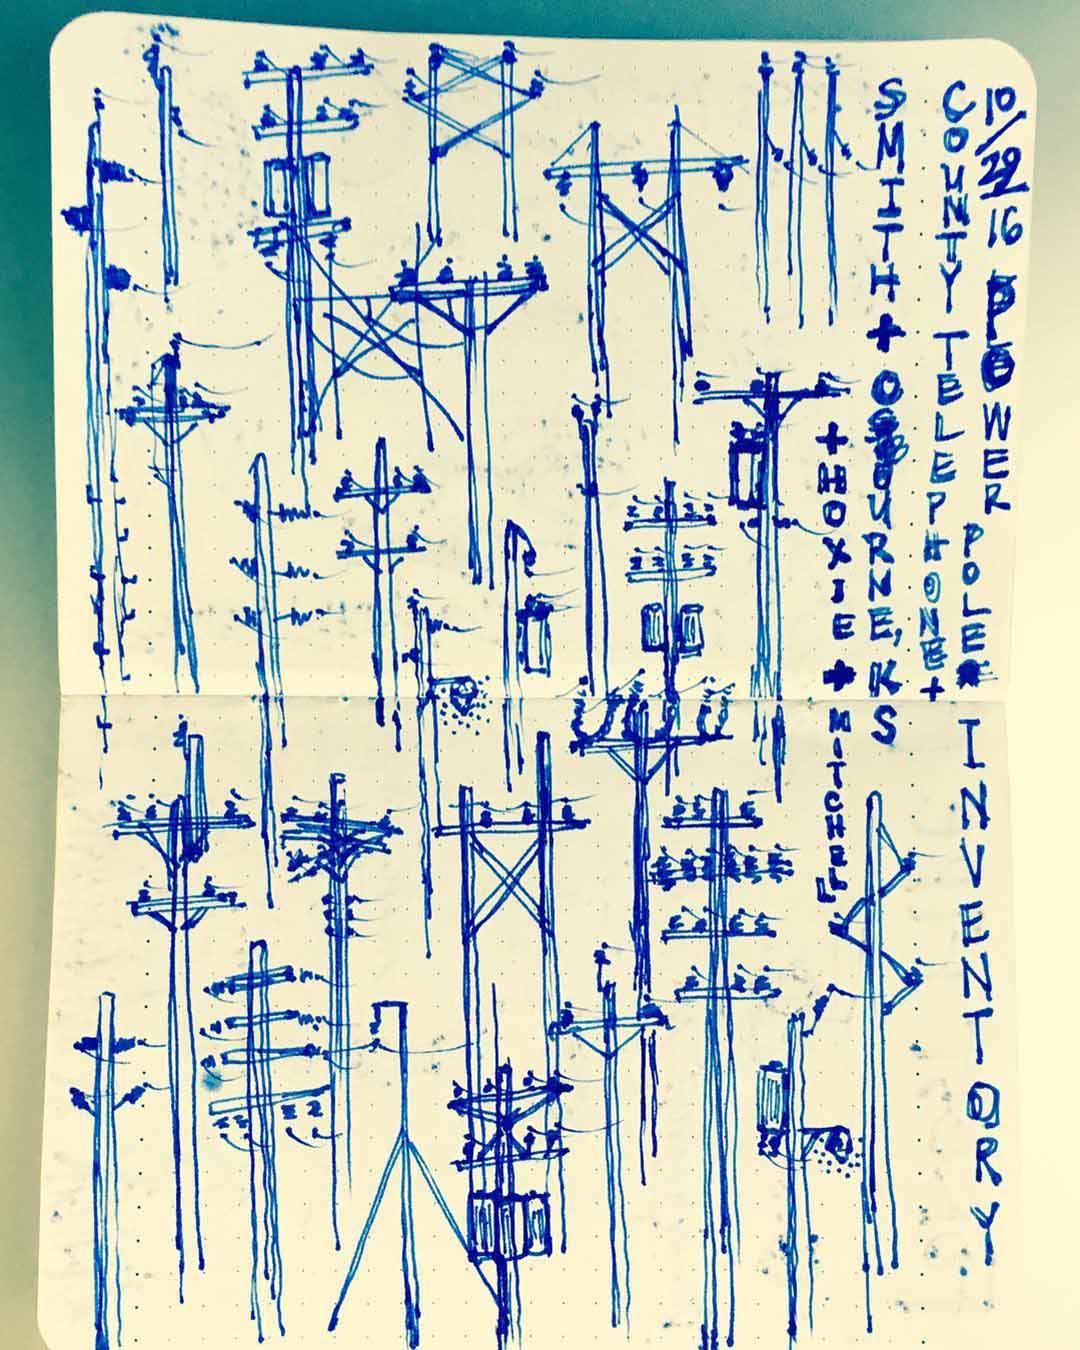 Dozens of distinctly engineered telephone and power poles, as documented in ink in my notebook.